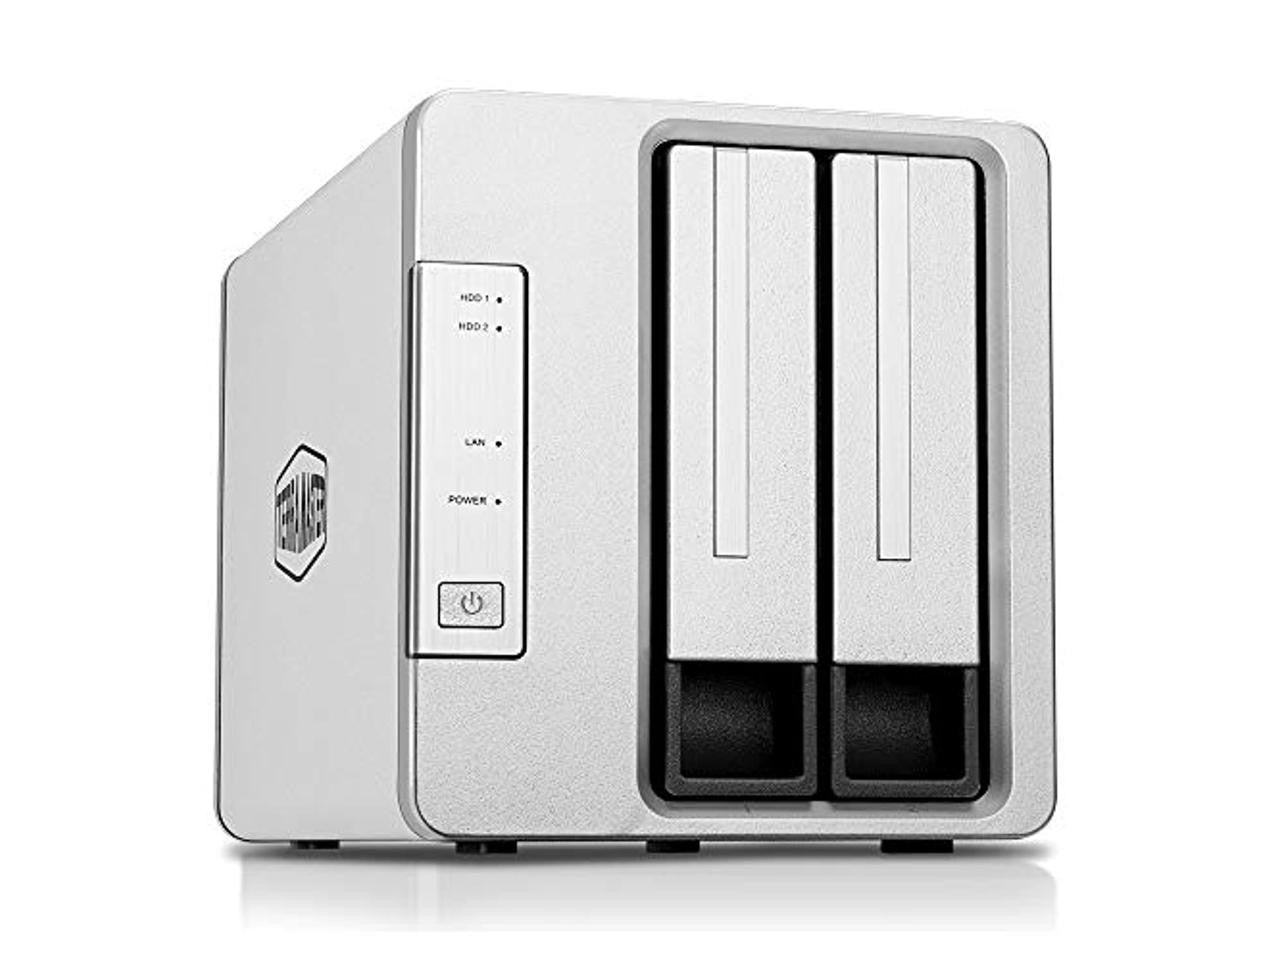 TerraMaster F2-210 2-Bay Home NAS with 12TB (2 x 6TB) of Seagate Ironwolf NAS Drives Fully Assembled and Tested